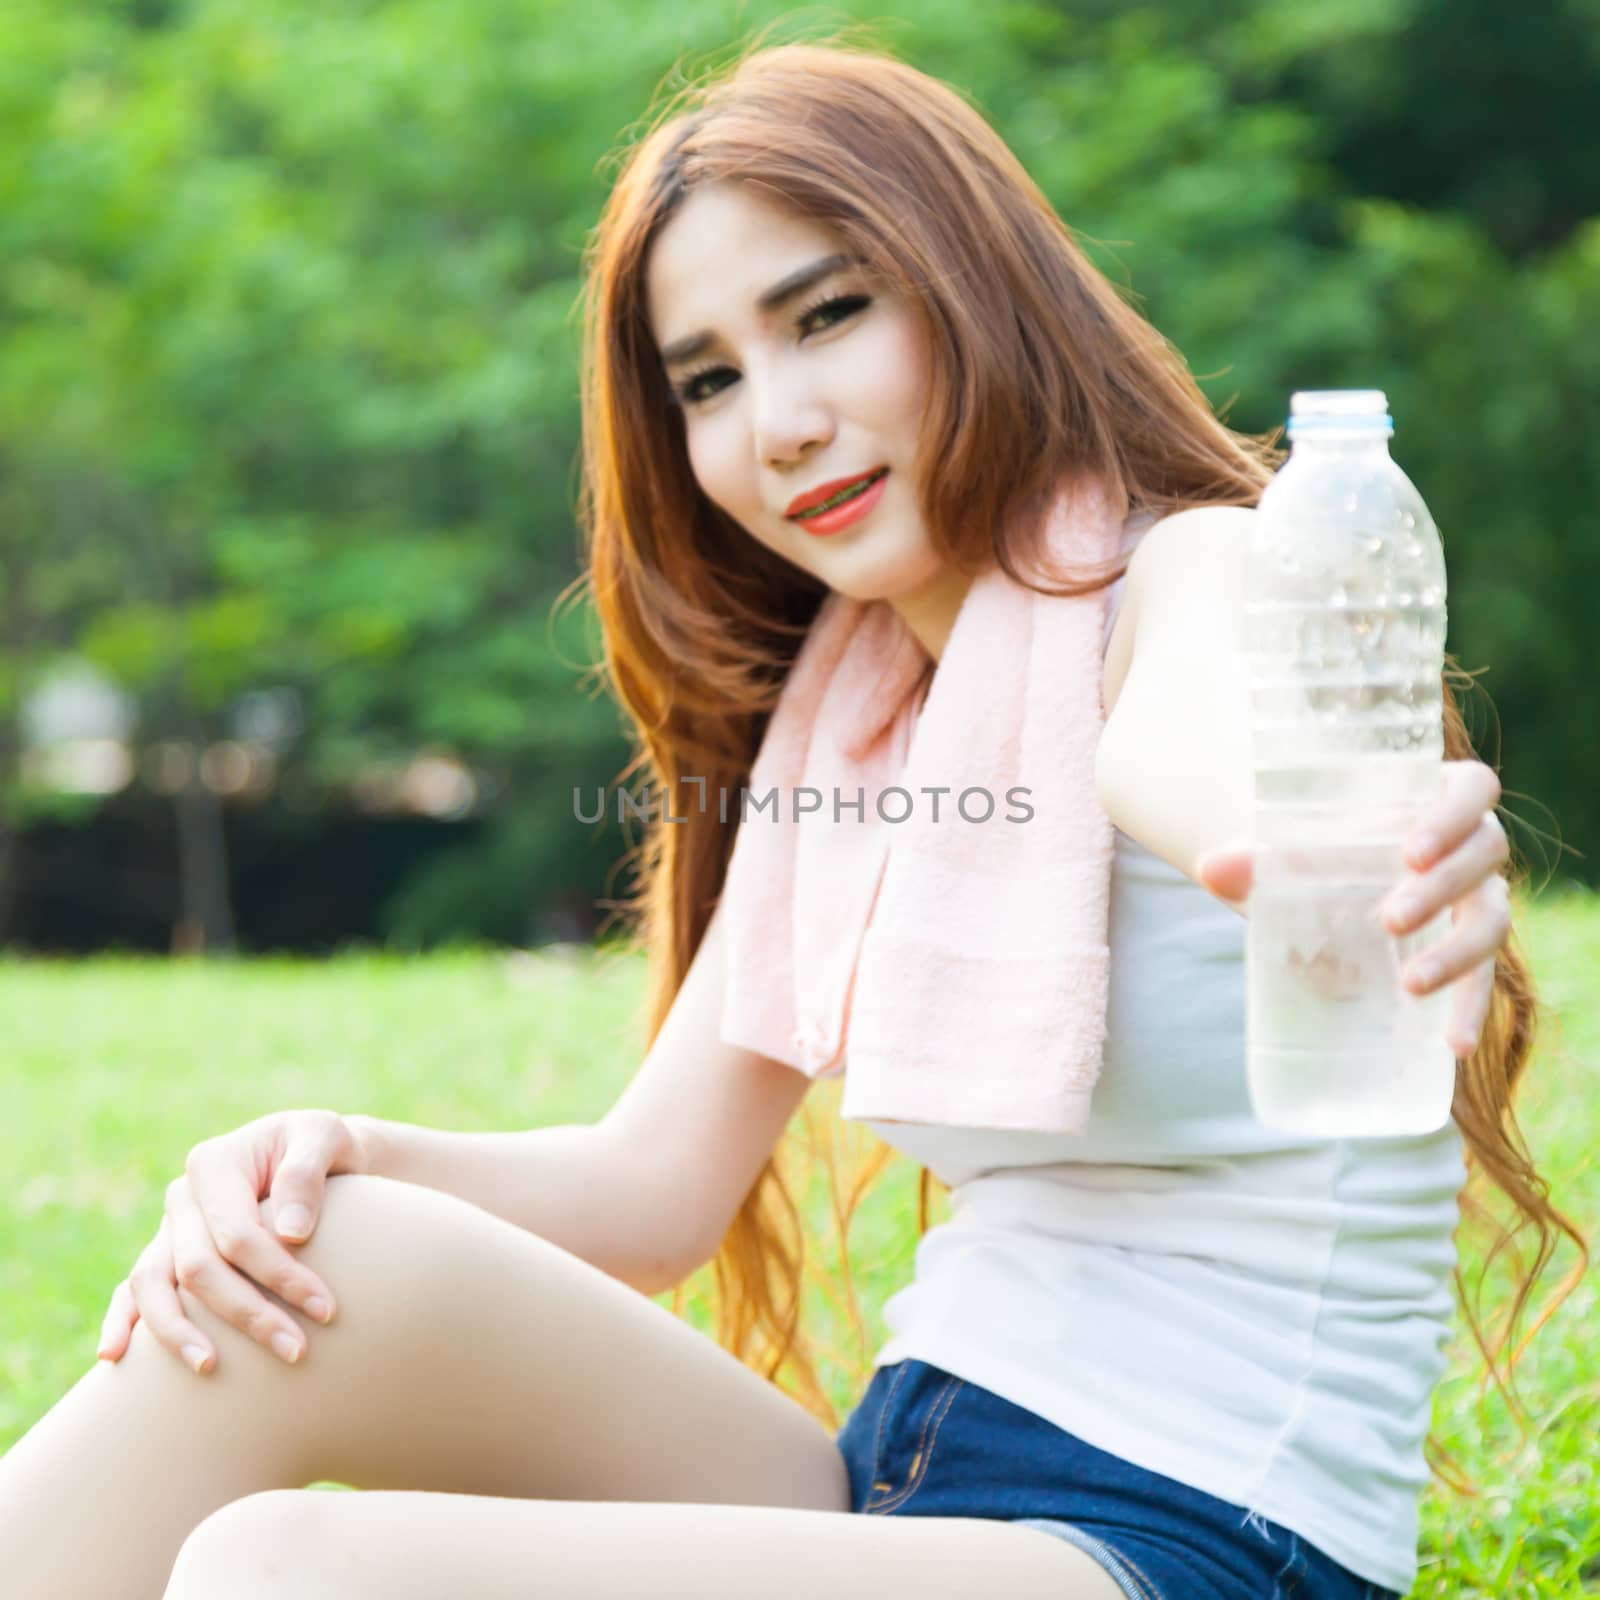 Women held a water bottle to drink. Sit on the lawn after exercise in park.